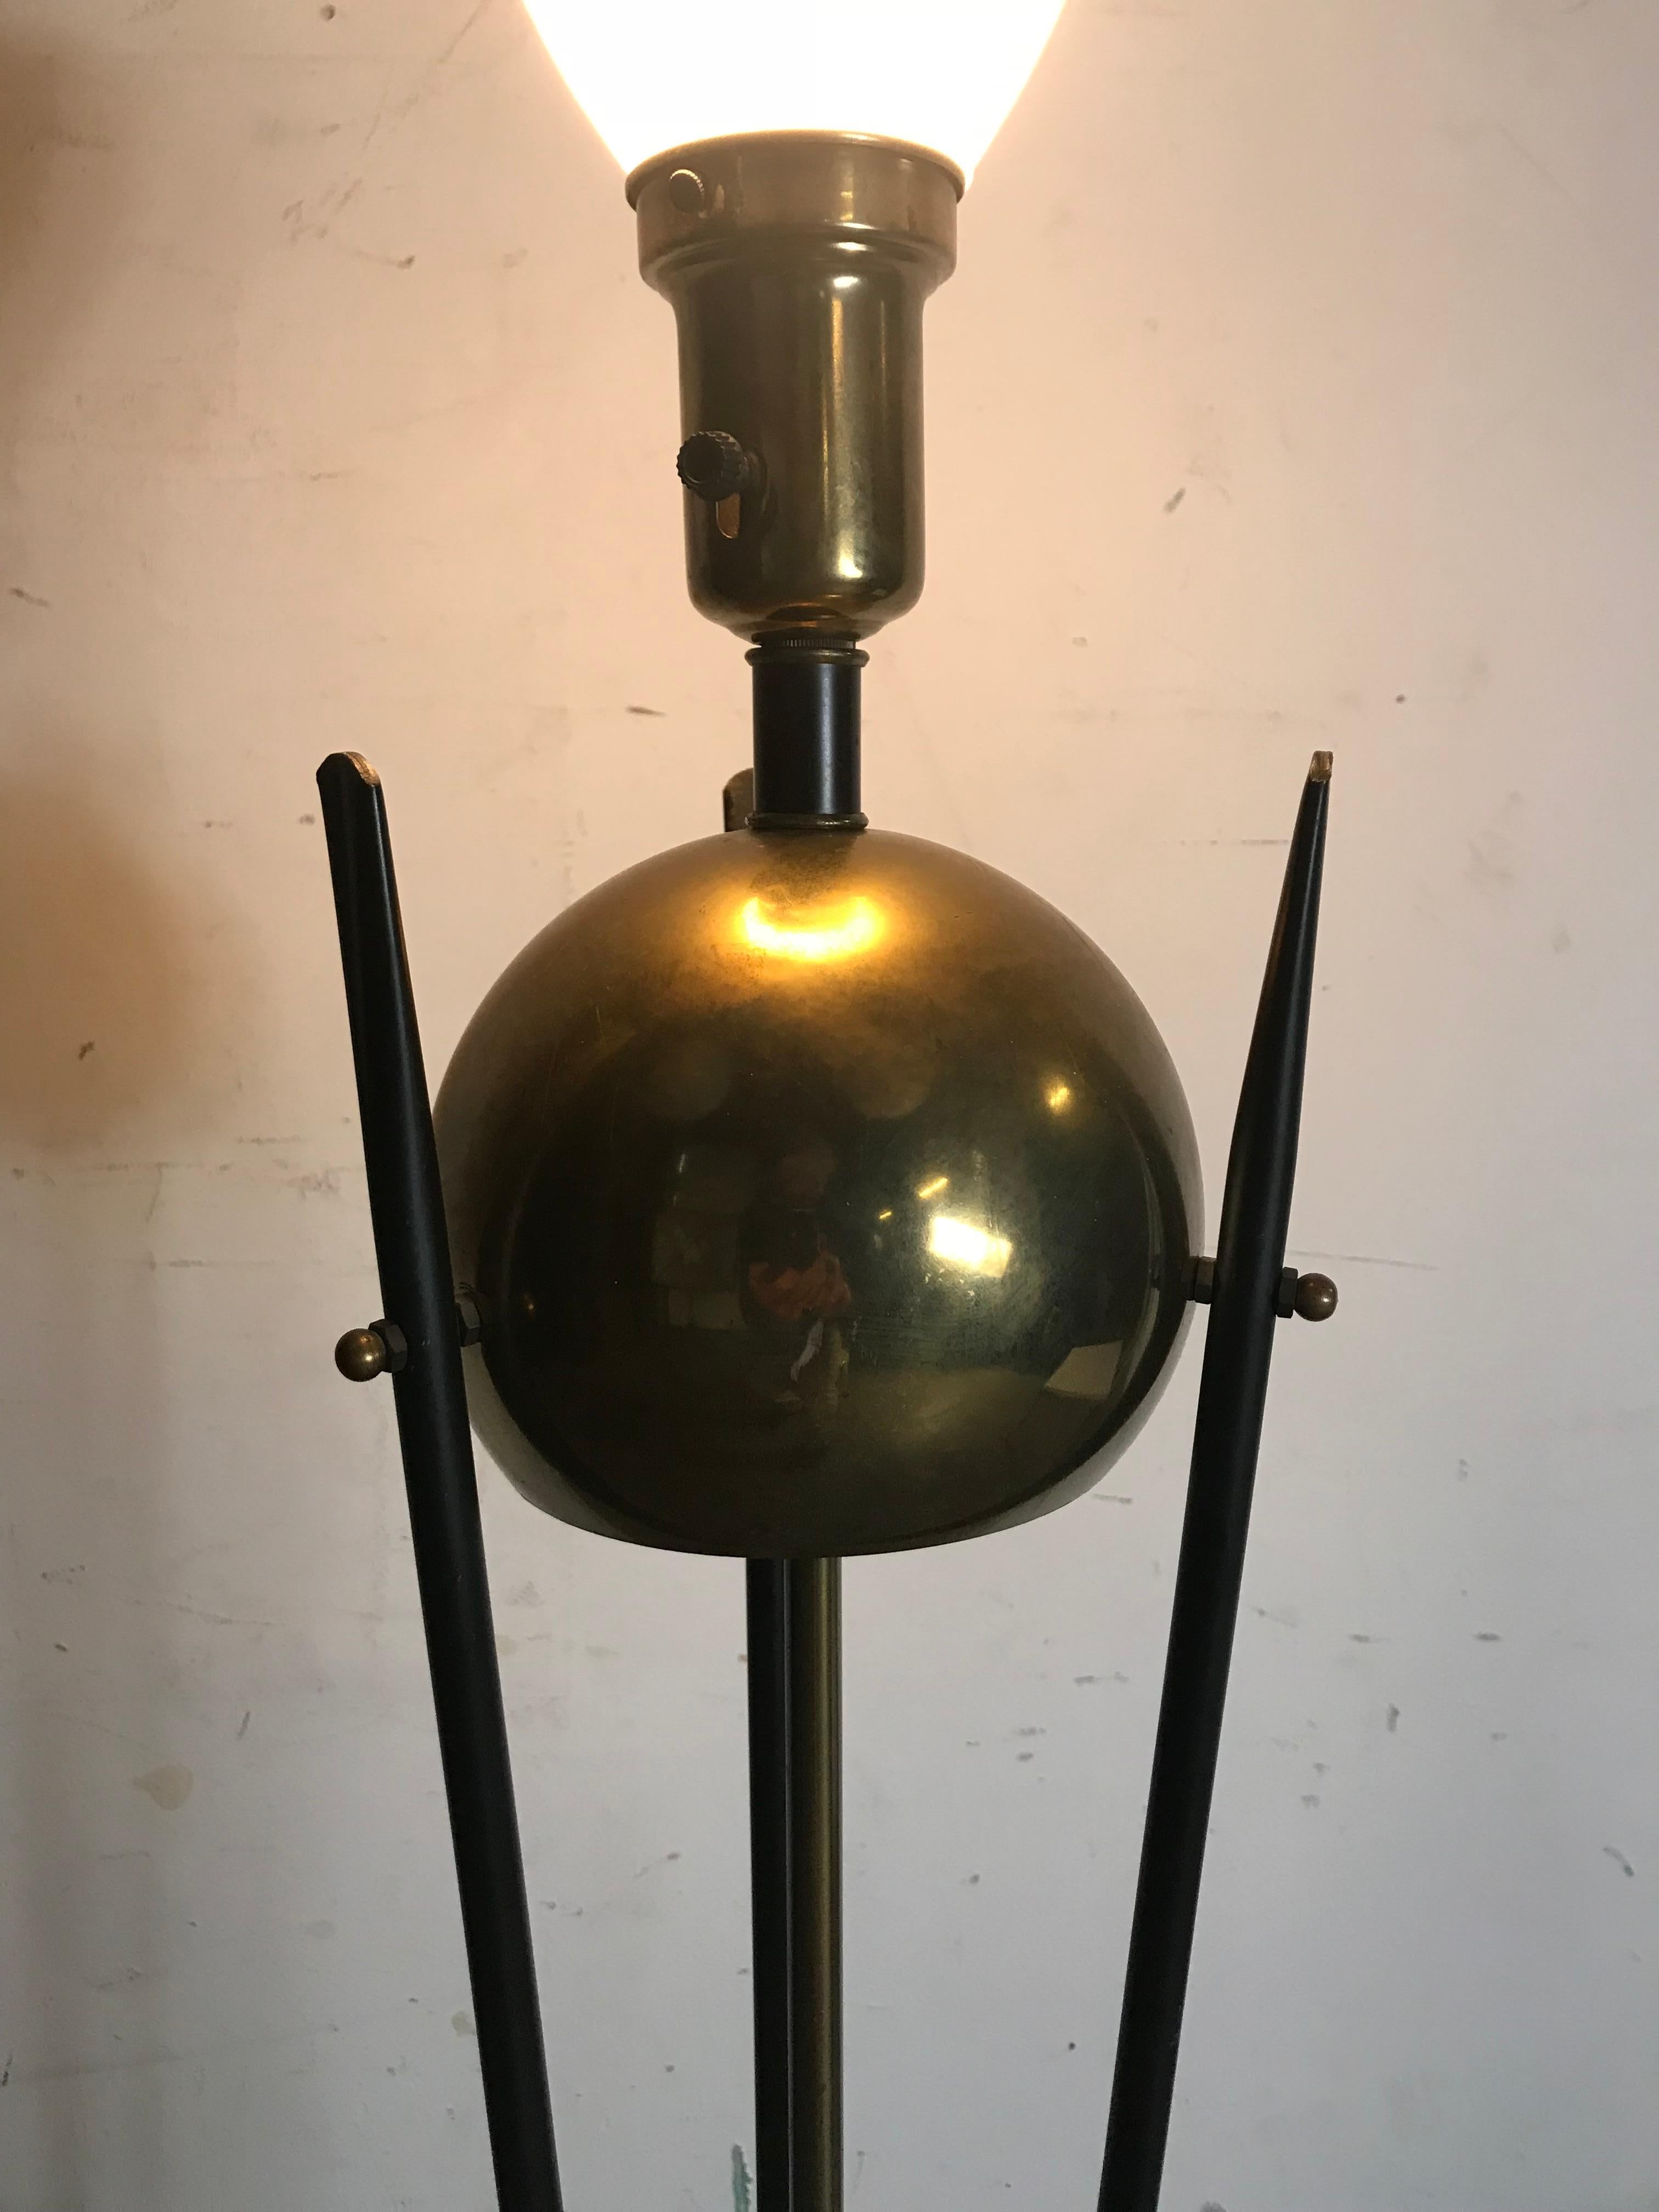 Mid-Century Modern brass and Iron floor lamp, attributed to Gerald Thurston for Lightolier, great design and quality featuring scrolled iron base with ball detail, large brass sphere, flattened hammed iron at top.3-way light switch.